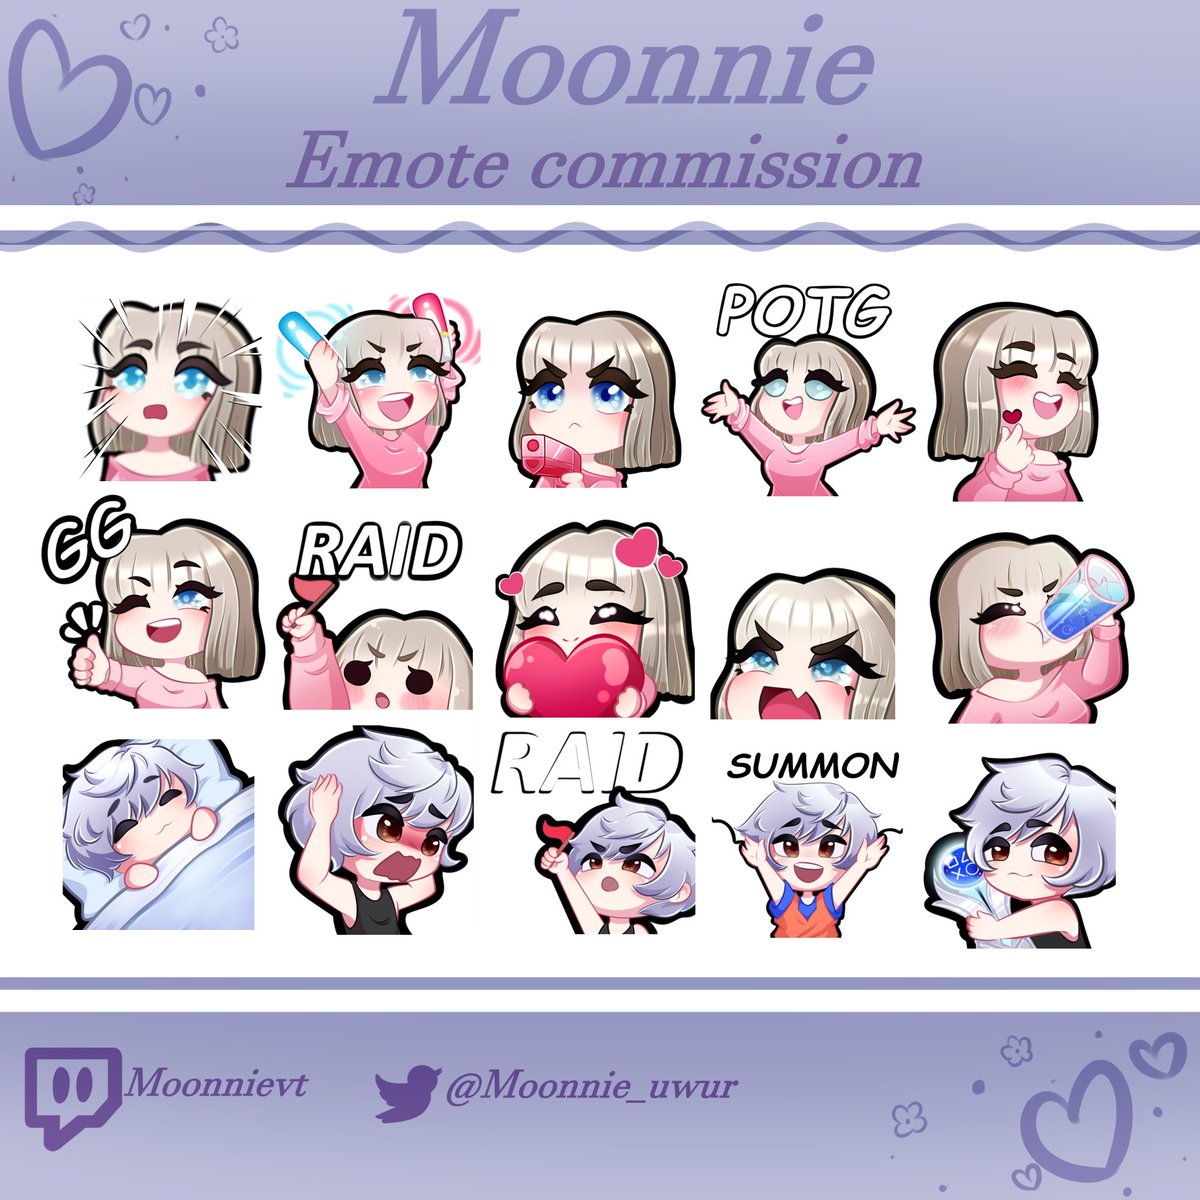 ❤️✨Comission finish for @dollvpink and @DaelePlay ❤️✨

Thank you very much for commissioning me ✨🌺

#emotes #commissions #emoteartist #commissionsopen #Commission #TwitchEmoteArtist #cute